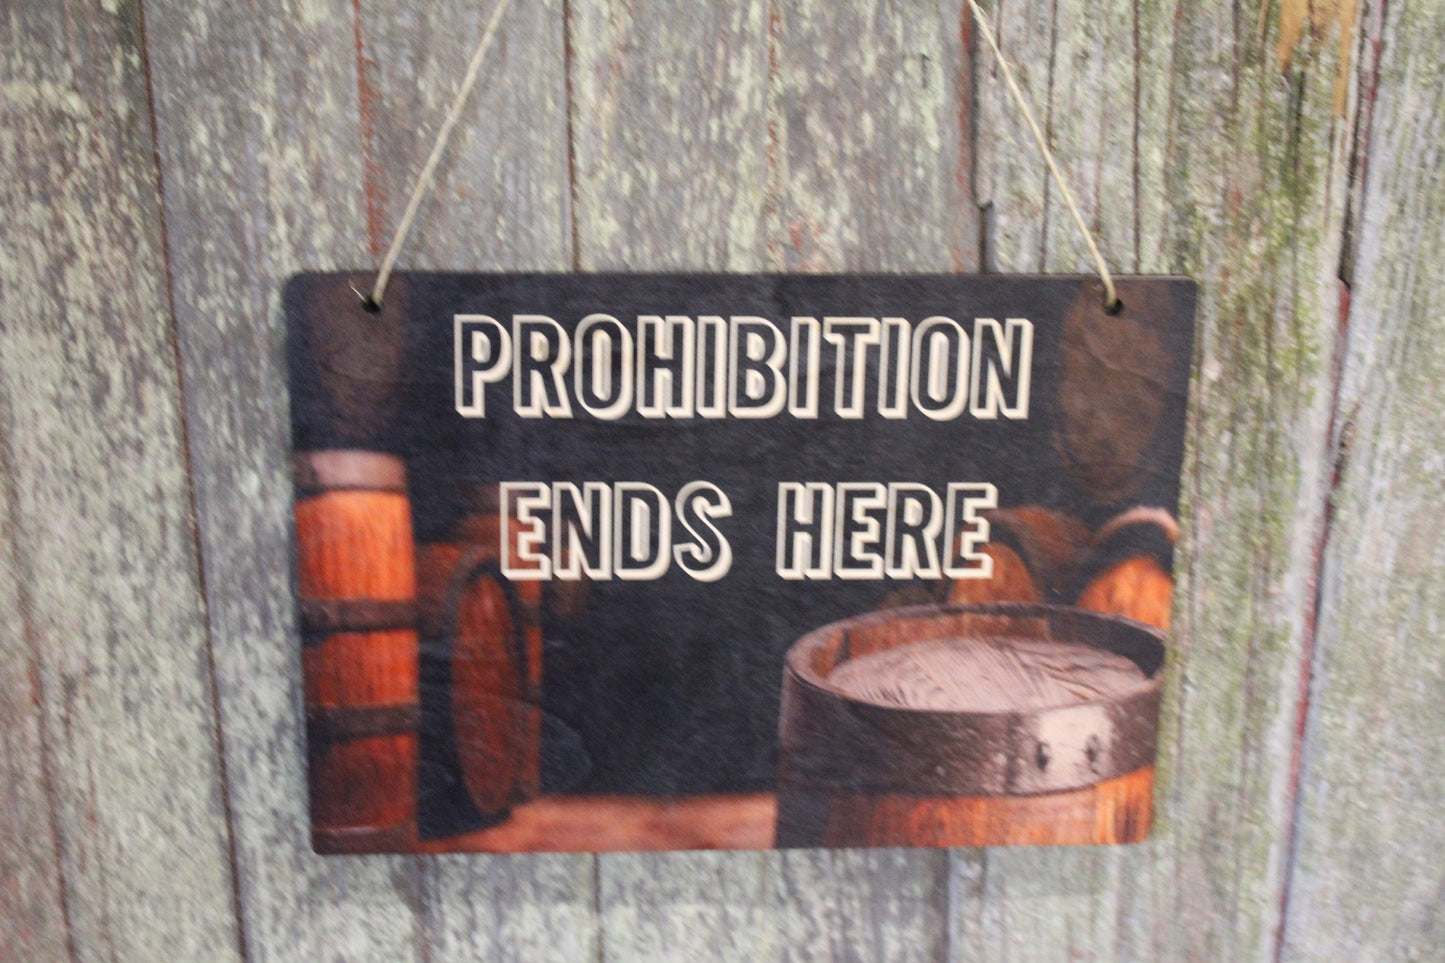 Bar Sign Prohibition Ends Here Liquor Drinking Man Cave Wine Barrel Humor Rustic Wooden Wall Decor Wood Print